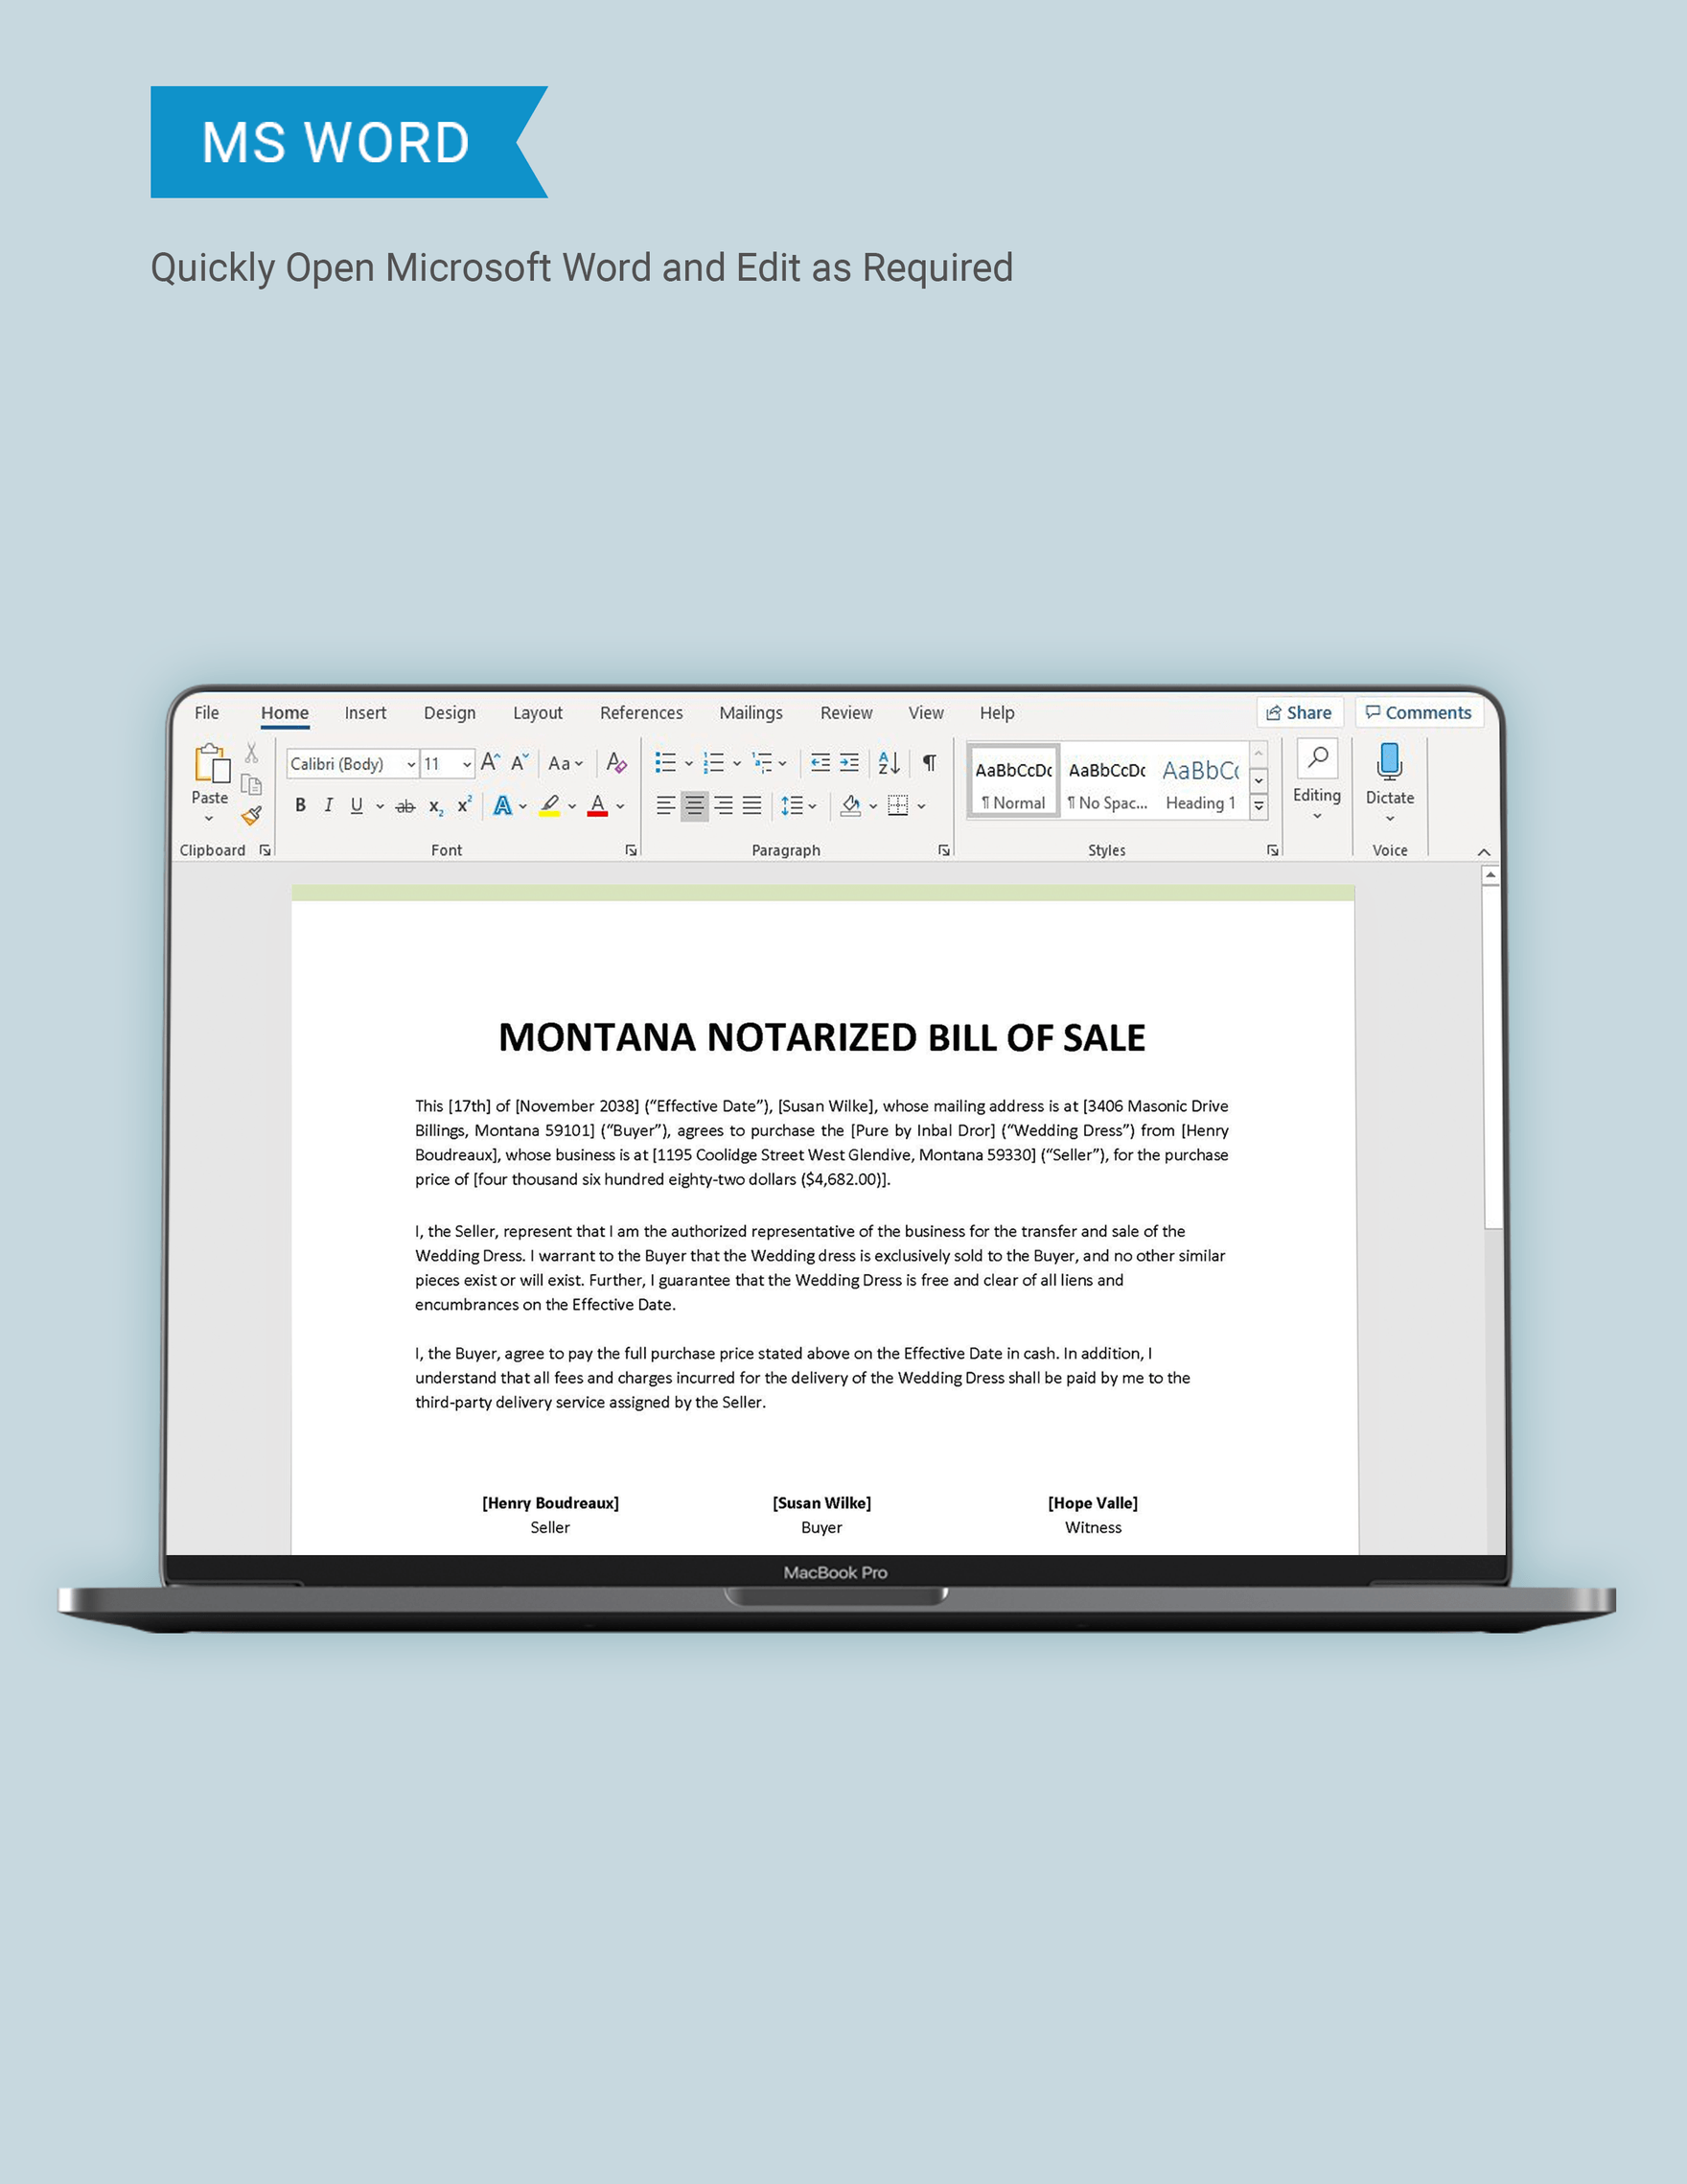 Montana Notarized Bill of Sale Template